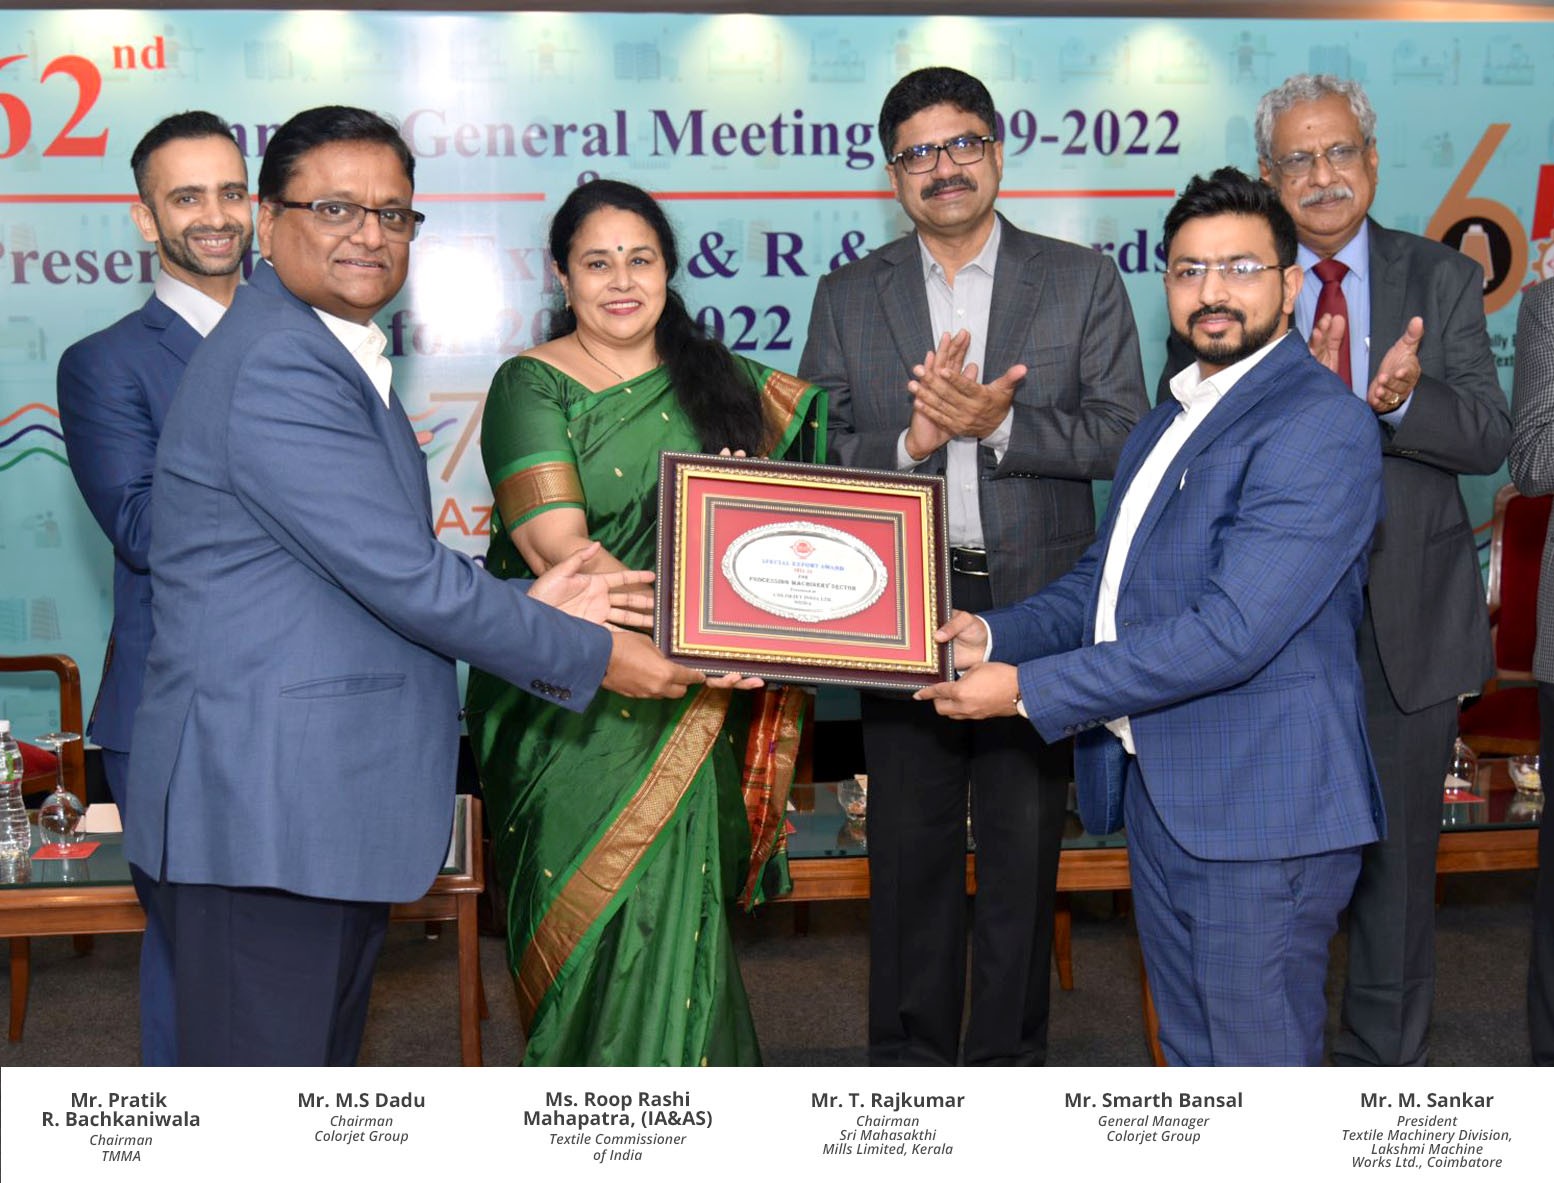 COLORJET TEXTILES BAGGED SPECIAL EXPORT AWARD FOR 2021-22